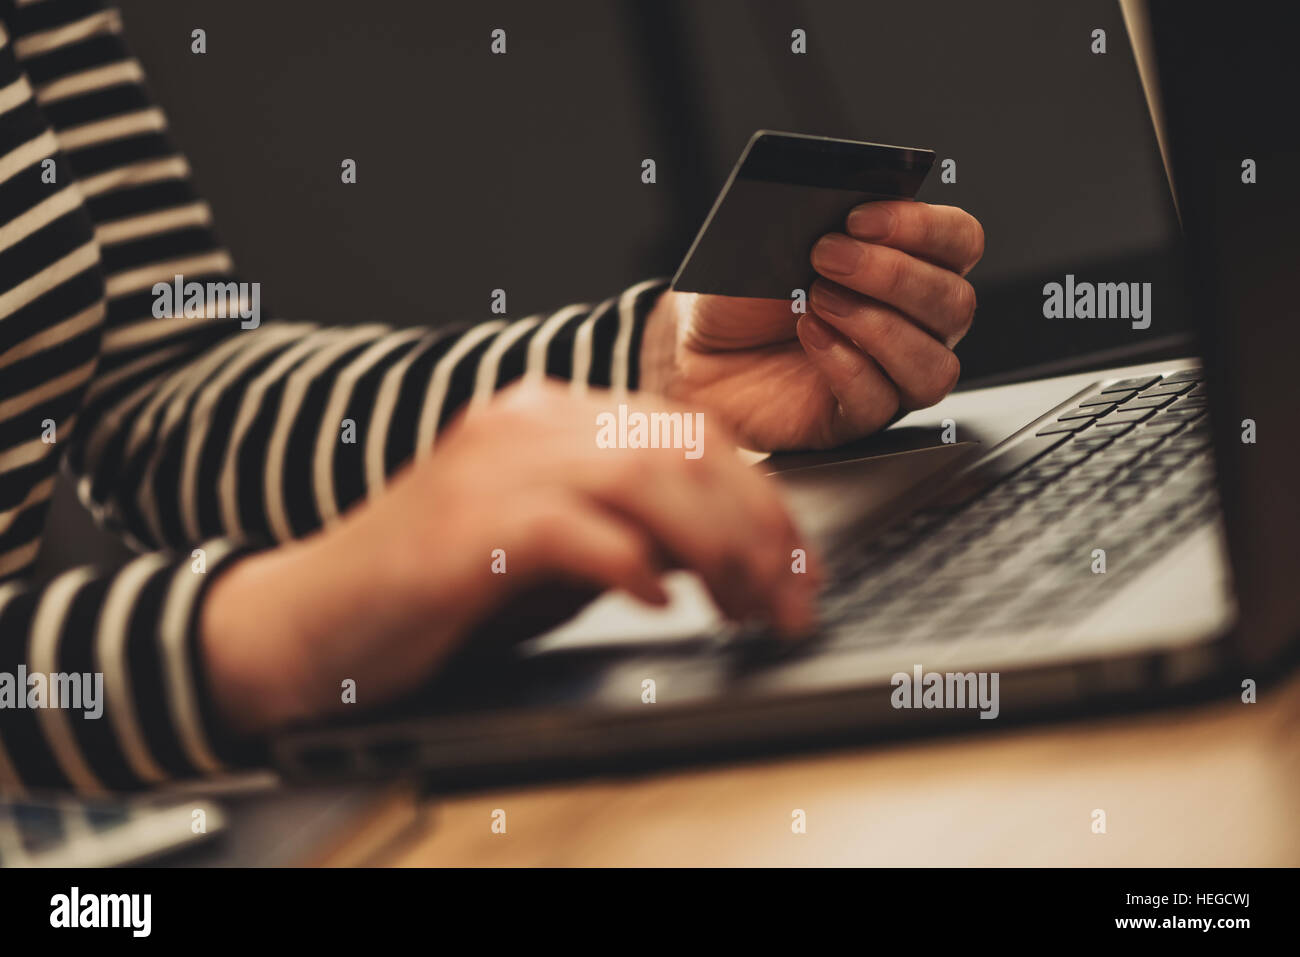 E-commerce concept - woman using laptop and credit card, close up of female hands typing e-wallet credentials for an online purchase transaction Stock Photo